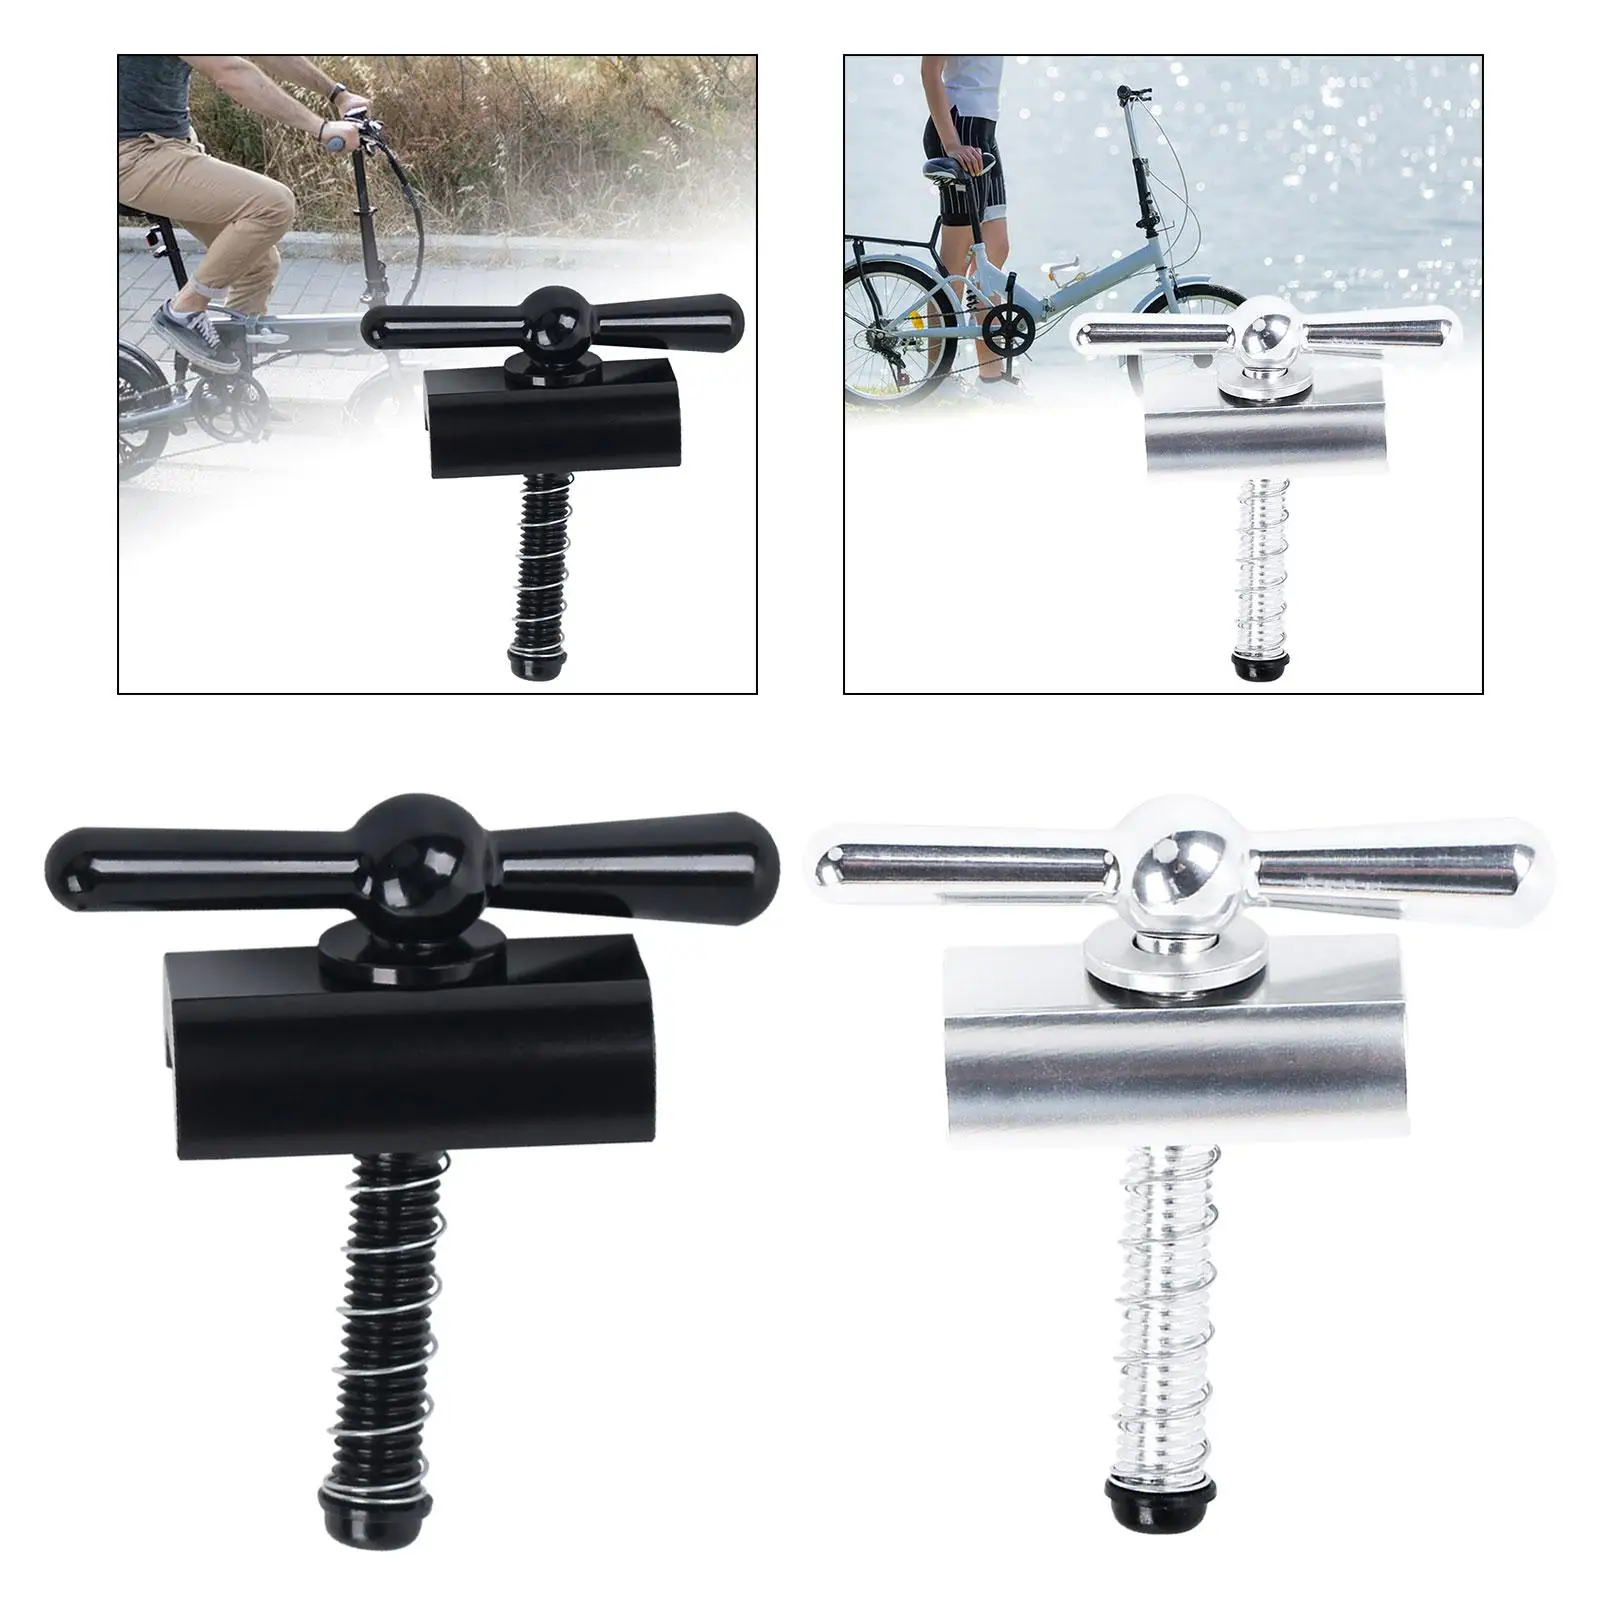 Folding Bike Hinge Clamp High Strength Bicycle Hinge Clamp Lever for Frame